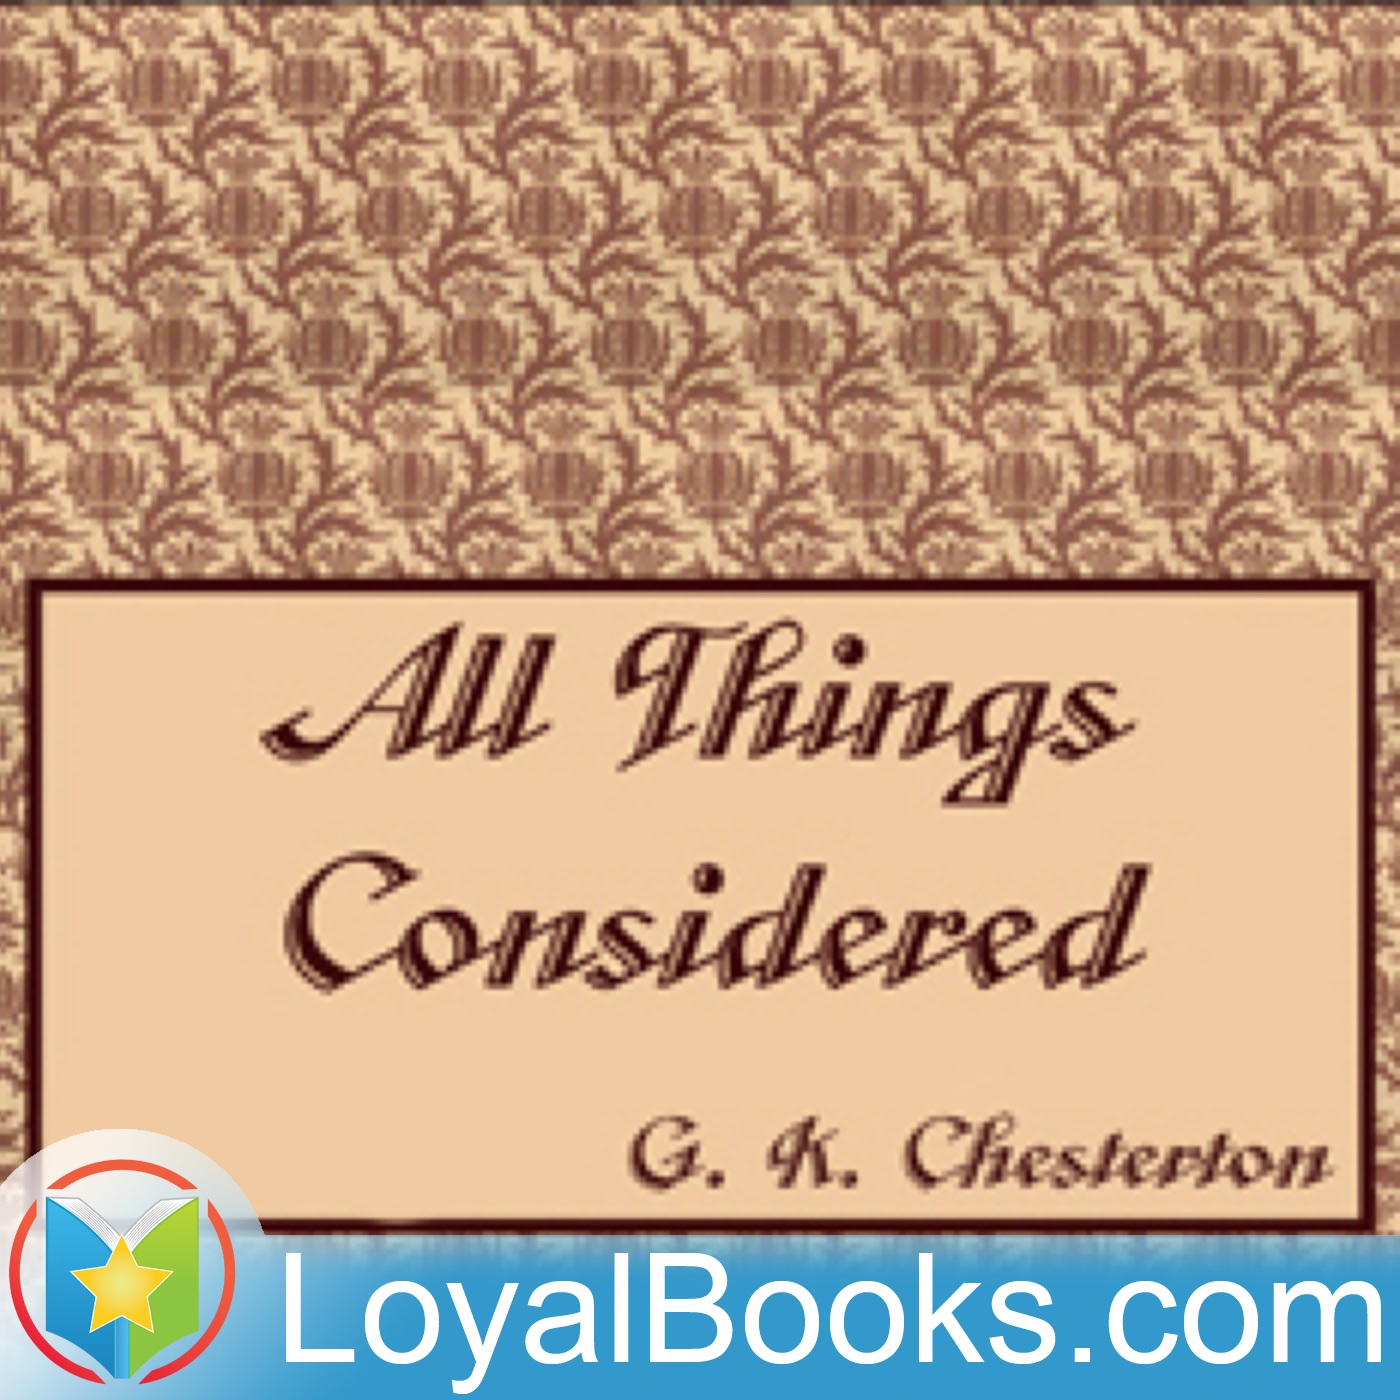 All Things Considered by G. K. Chesterton